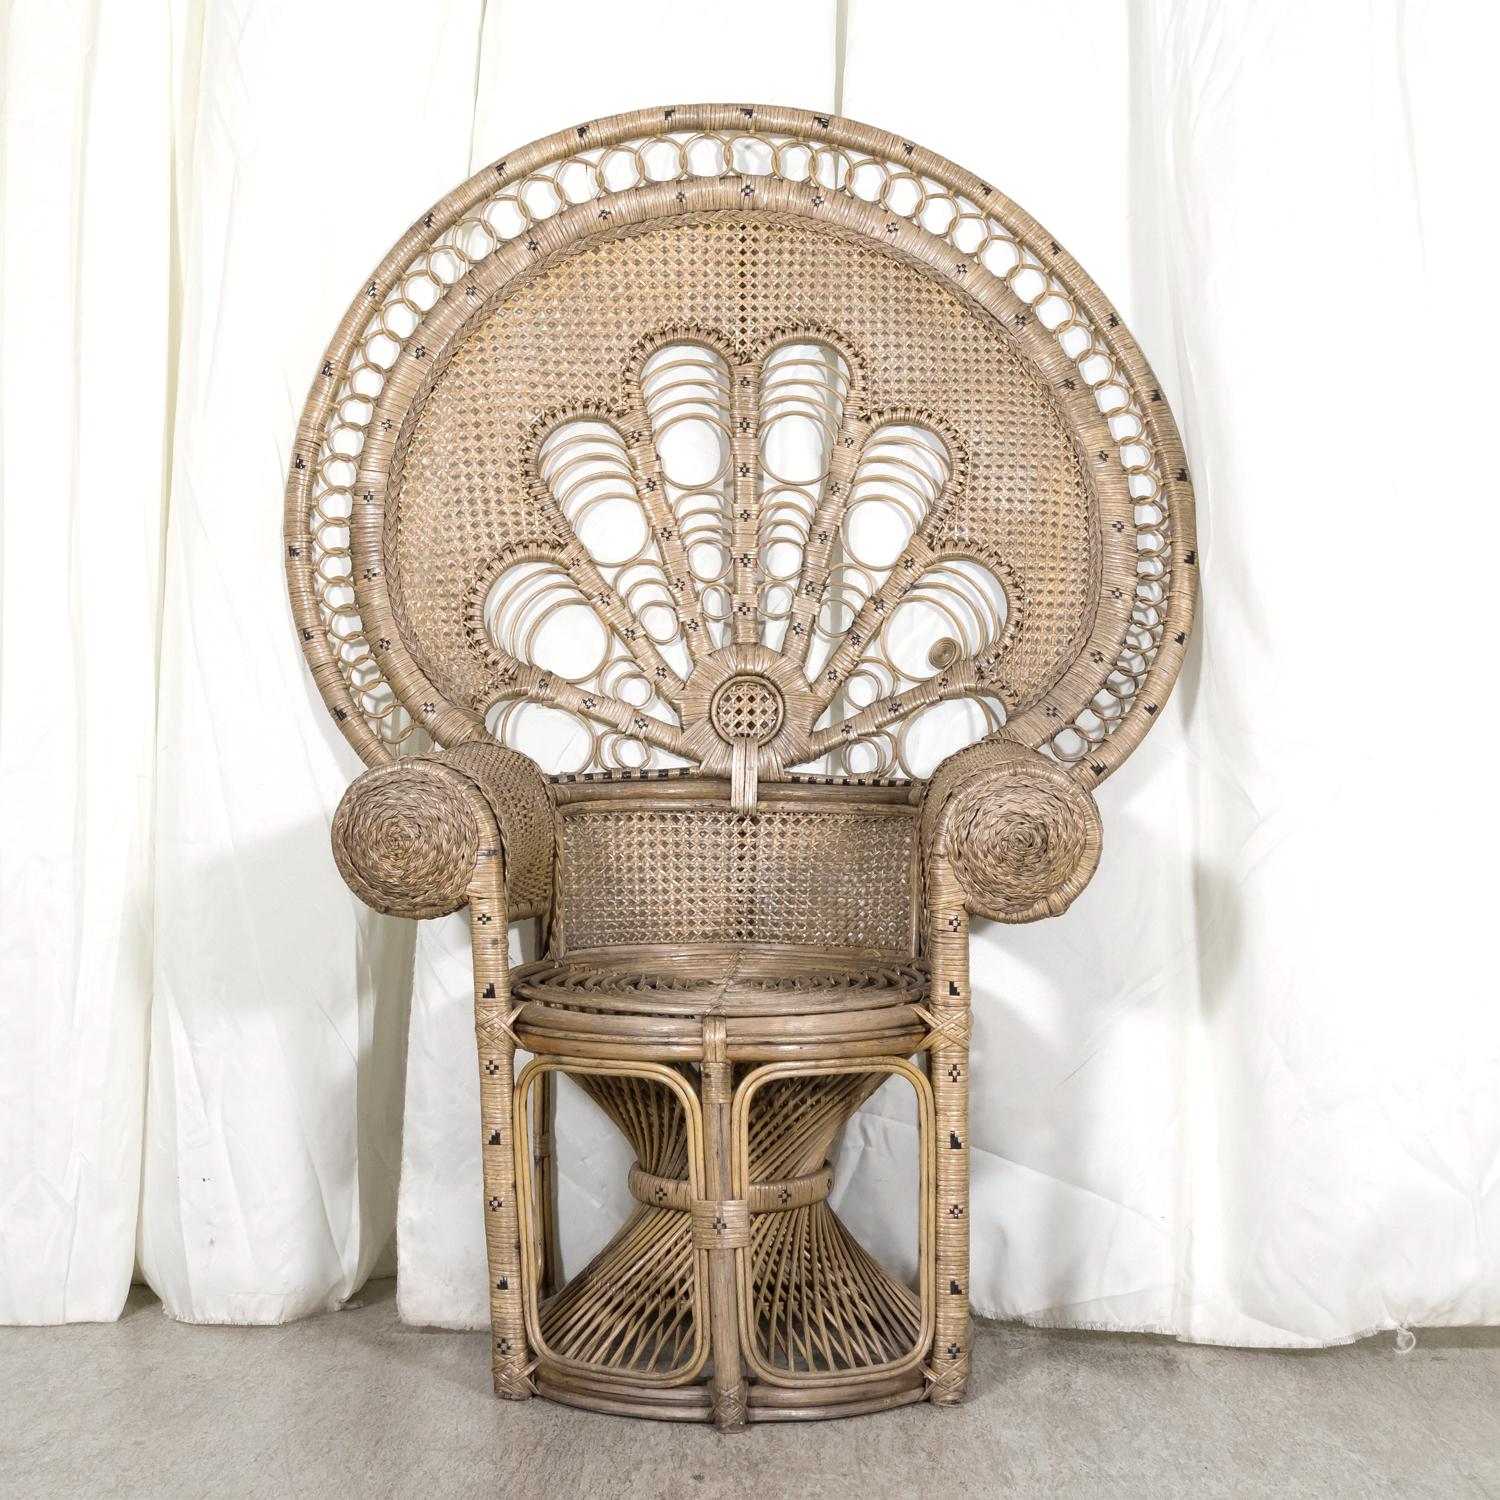 A large, classic 1930s Peacock chair handcrafted in France of woven two-toned rattan and wicker. Having a flamboyant shaped high flaring back that resembles the fanned feathers of the bird after which it's named, this rare chair features large